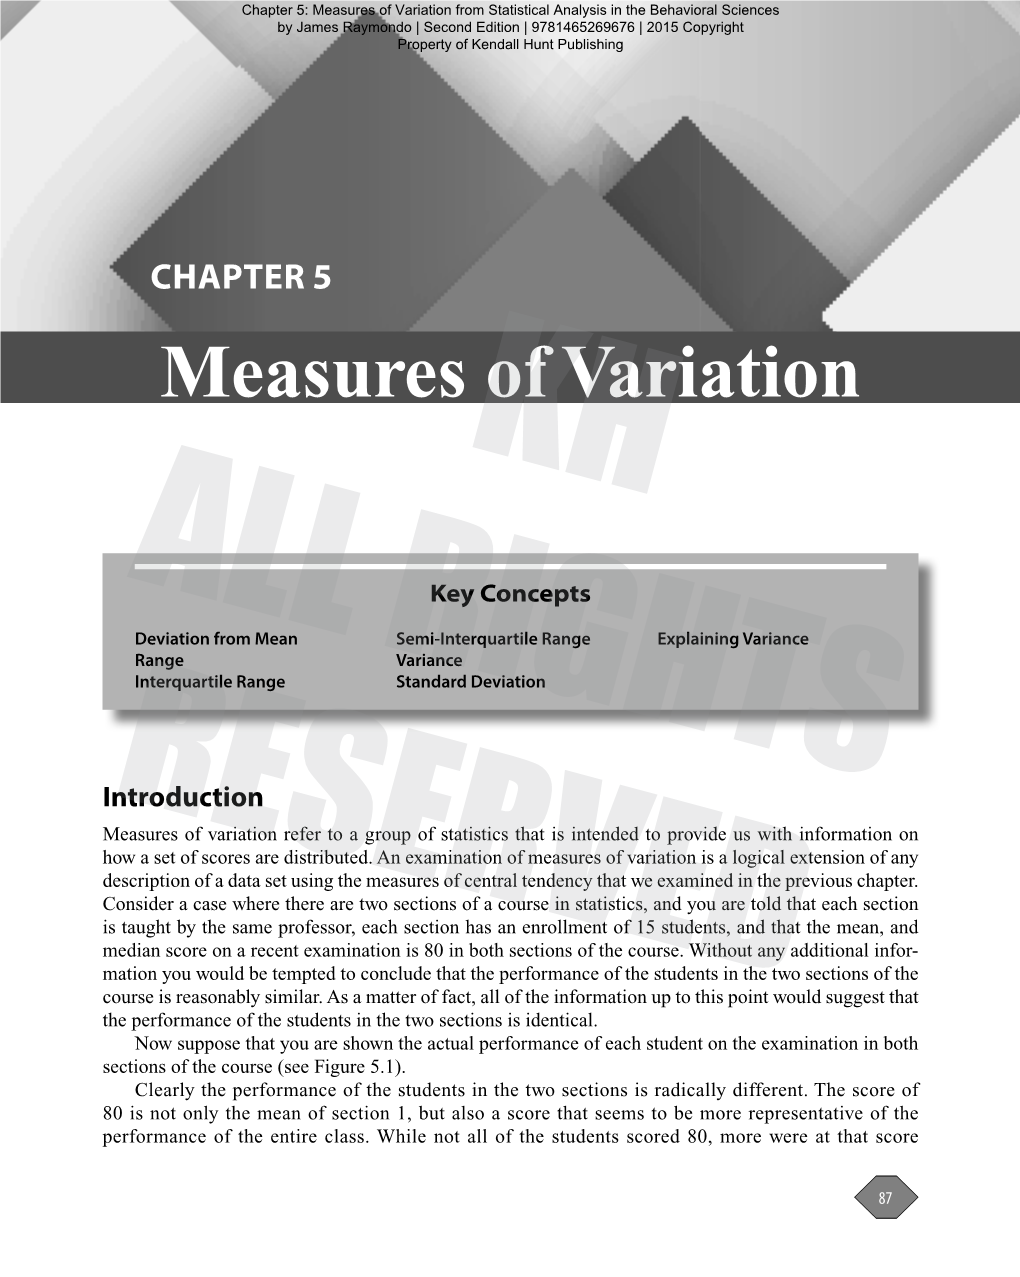 CHAPTER 5 Measures of Variation